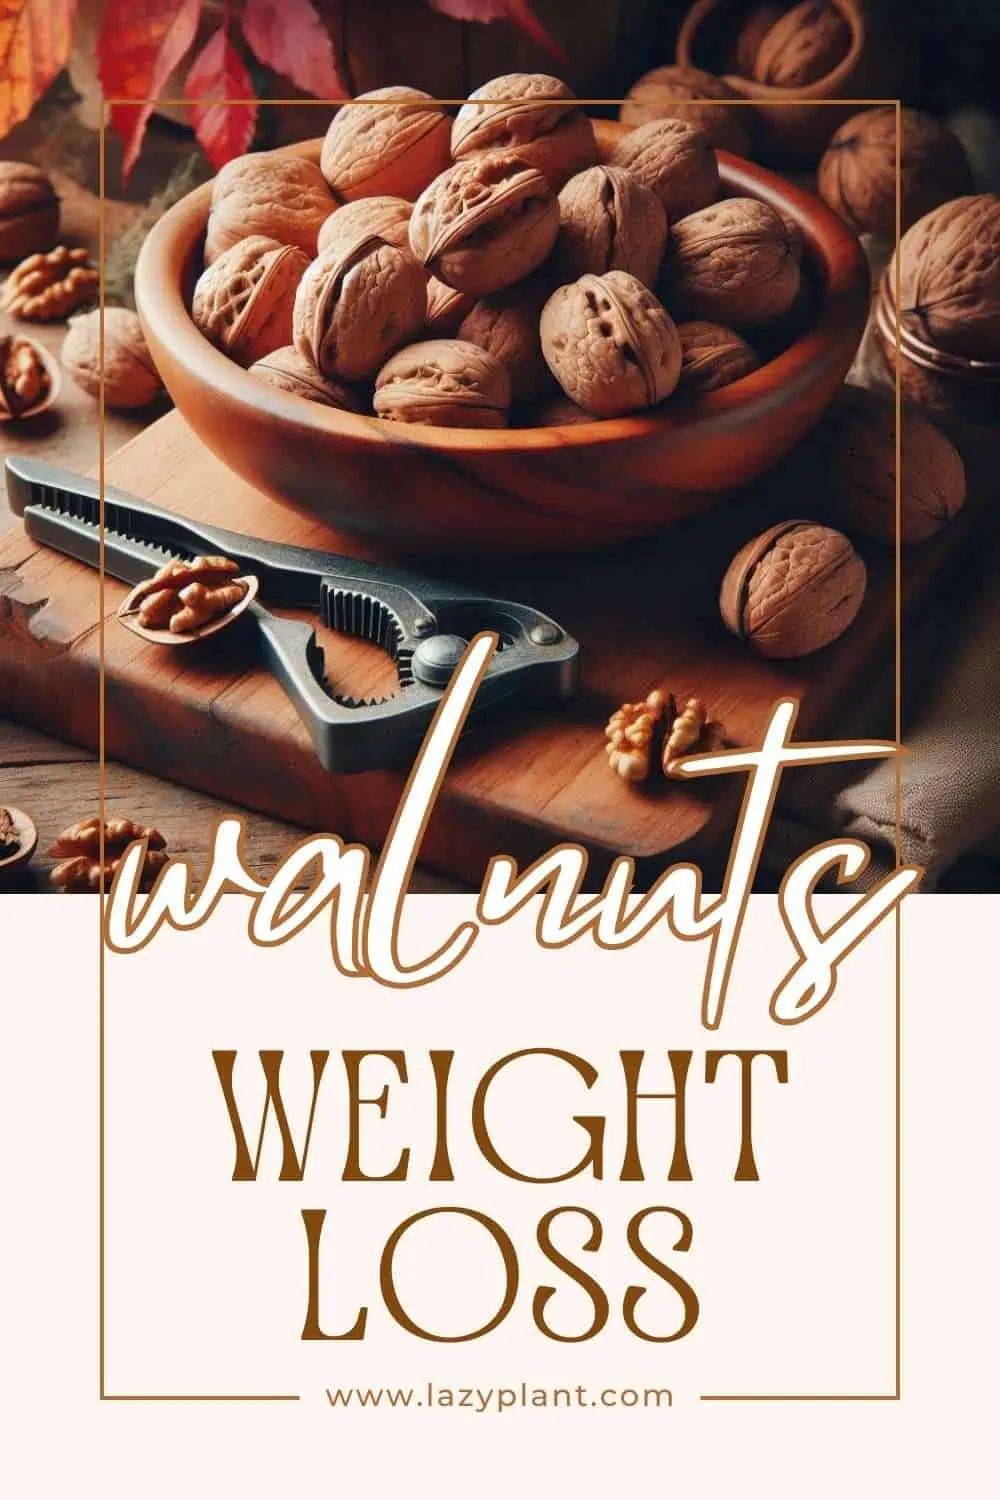 Walnuts support Weight Loss